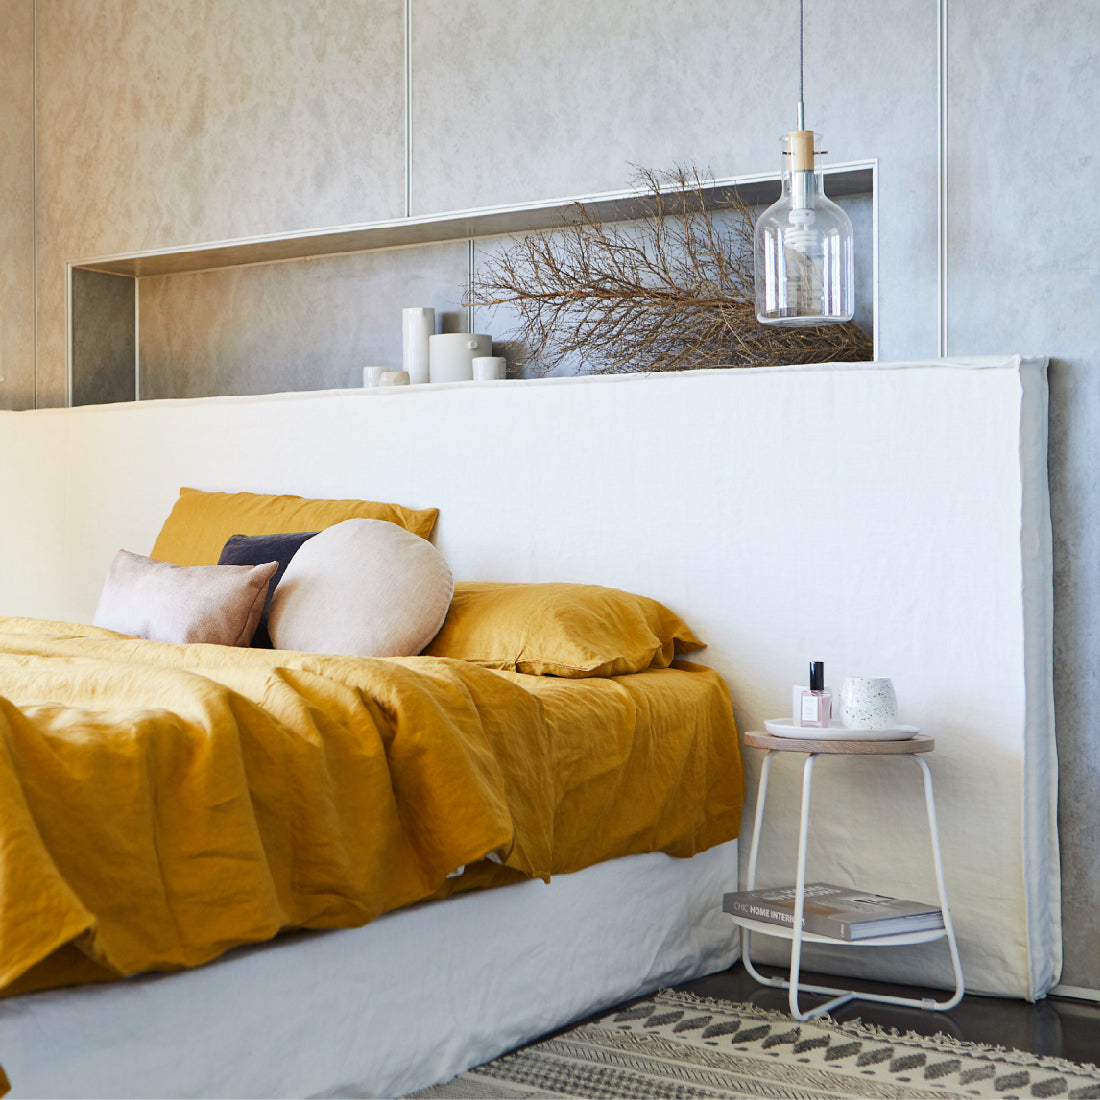 Wide bed head in white linen, pictured in a master bedroom against concrete walls